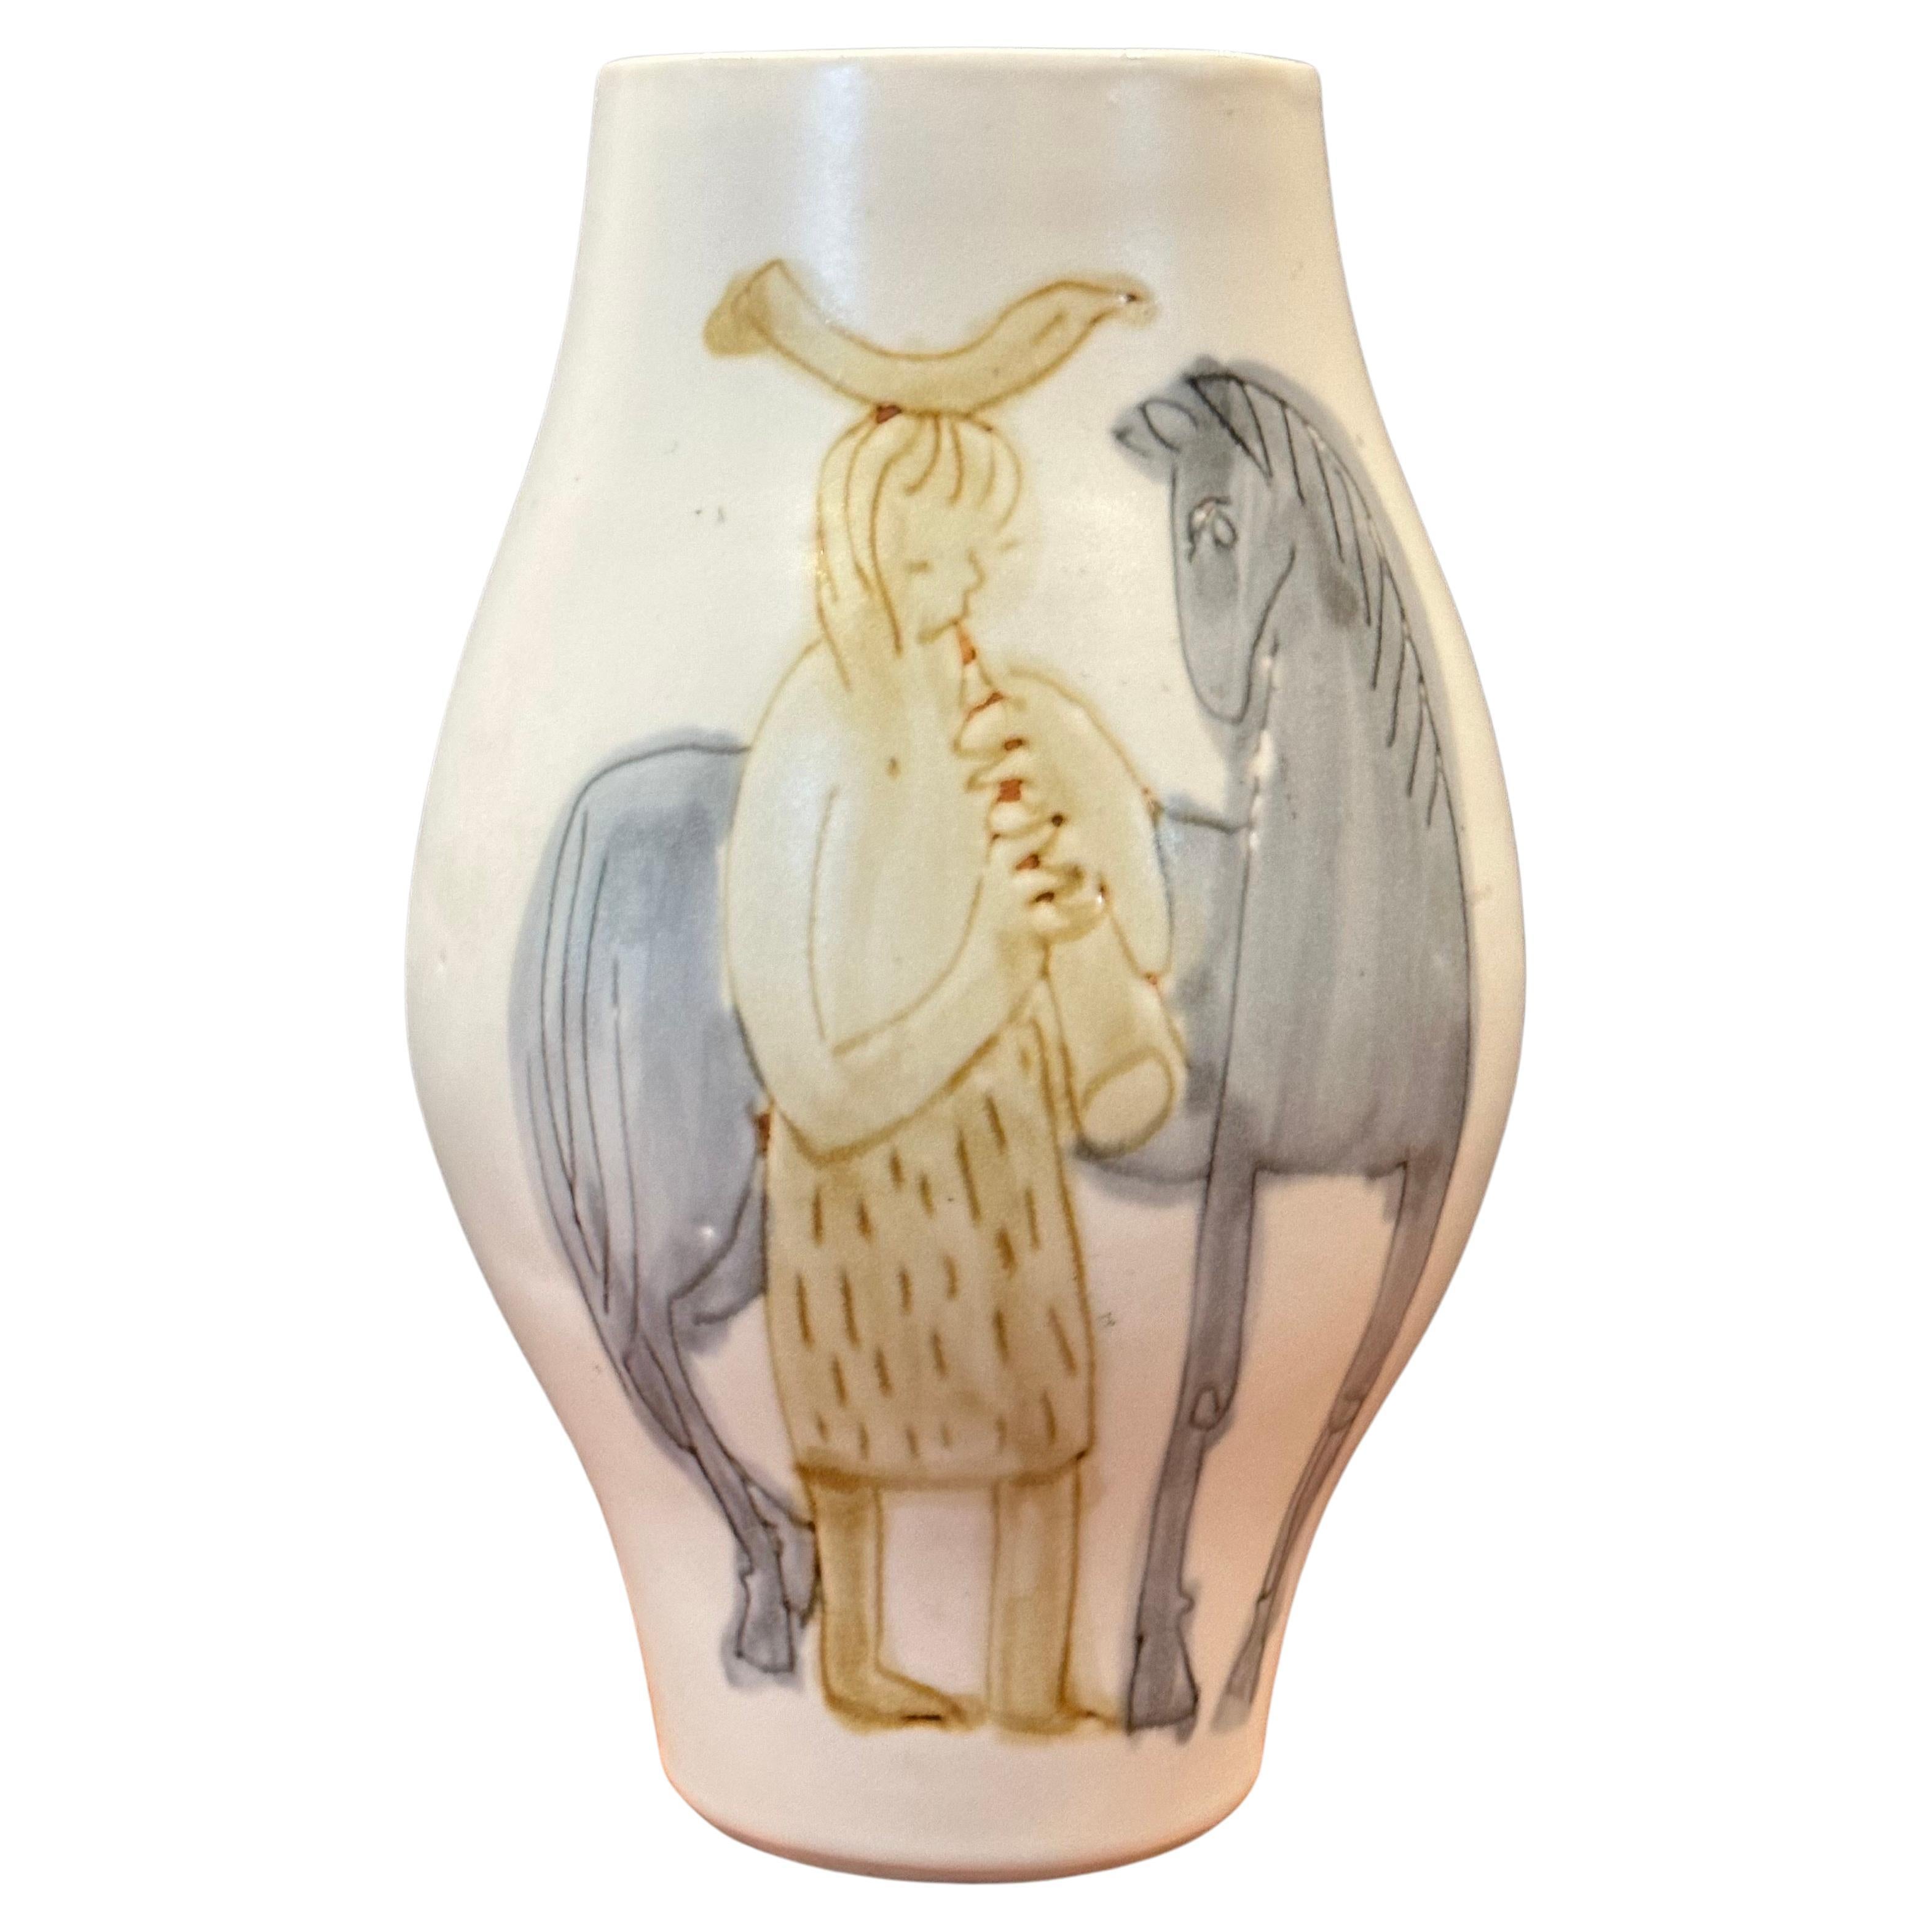 A really cool hand painted ceramic vase with Picasso like horse painting, circa 1970s. This piece is in good vintage condition and measures approcimately 7